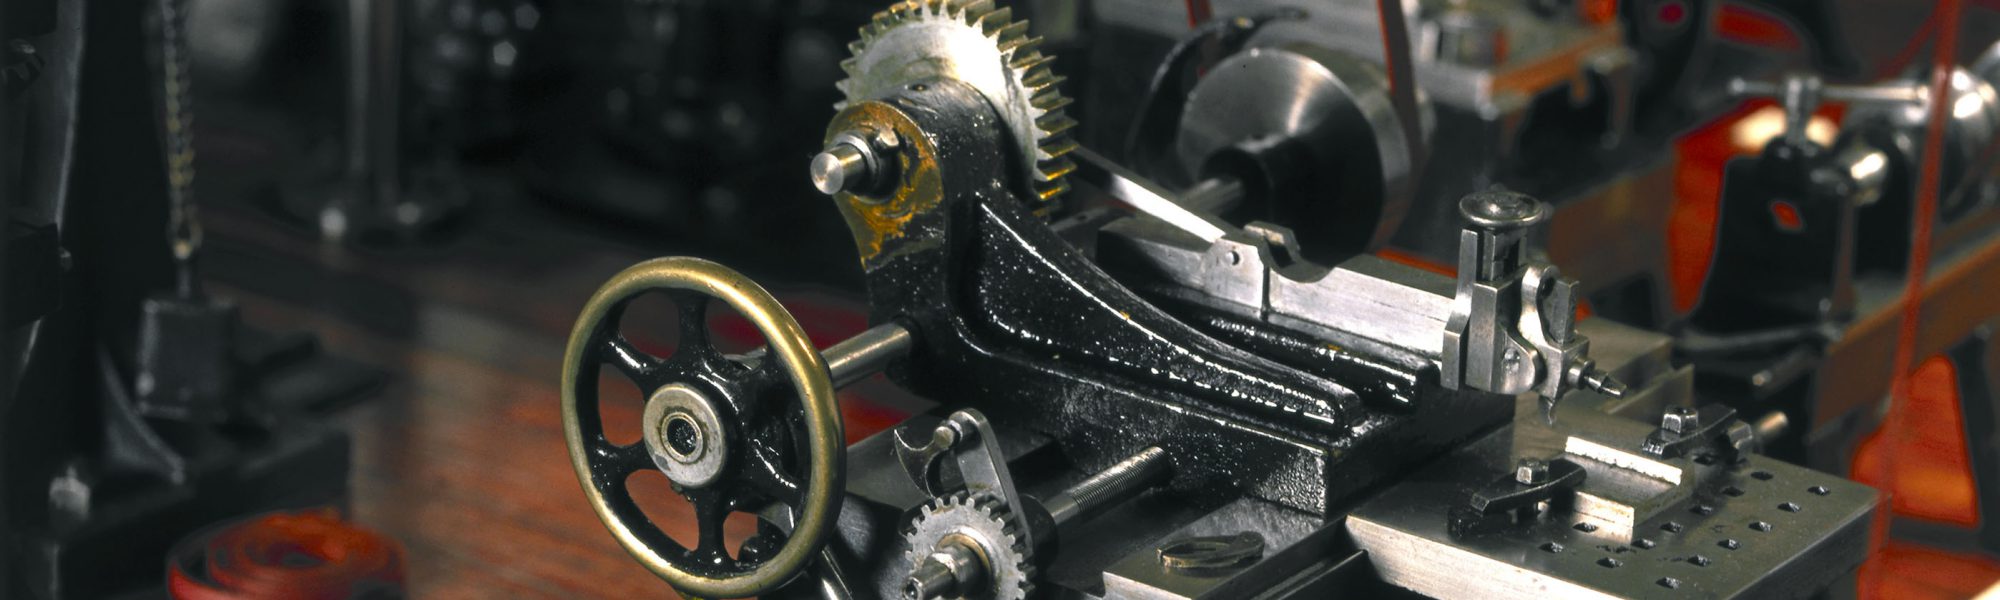 Colour photograph of detail of a miniature machine workshop model from late 1800s on display in the Science Museum London